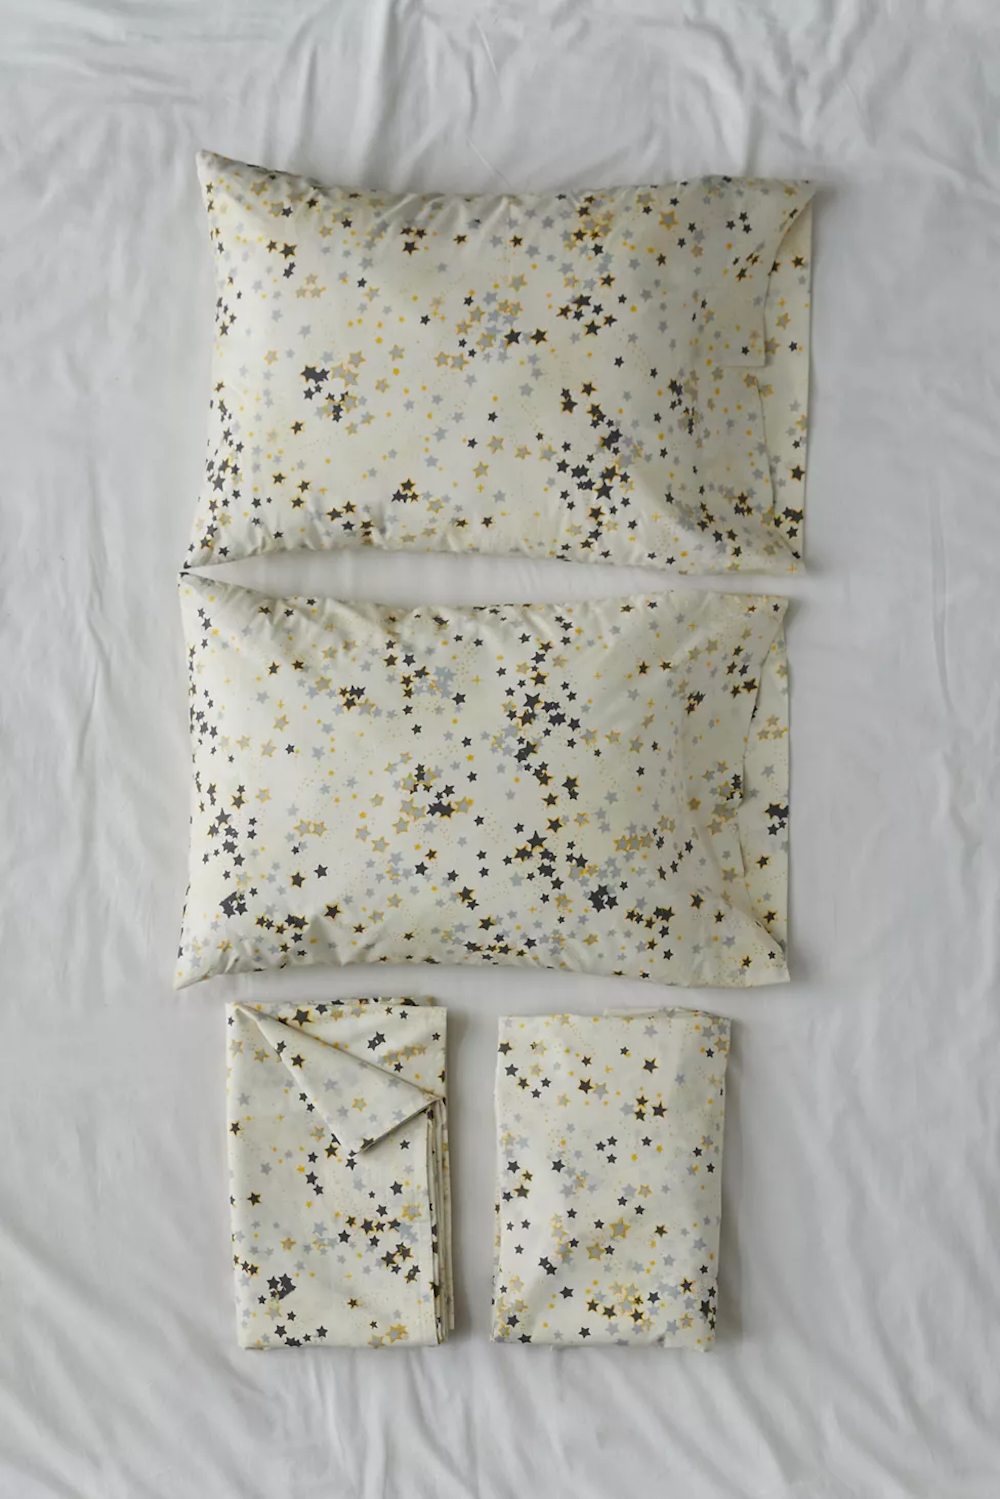 Urban Outfitters star sheet set.